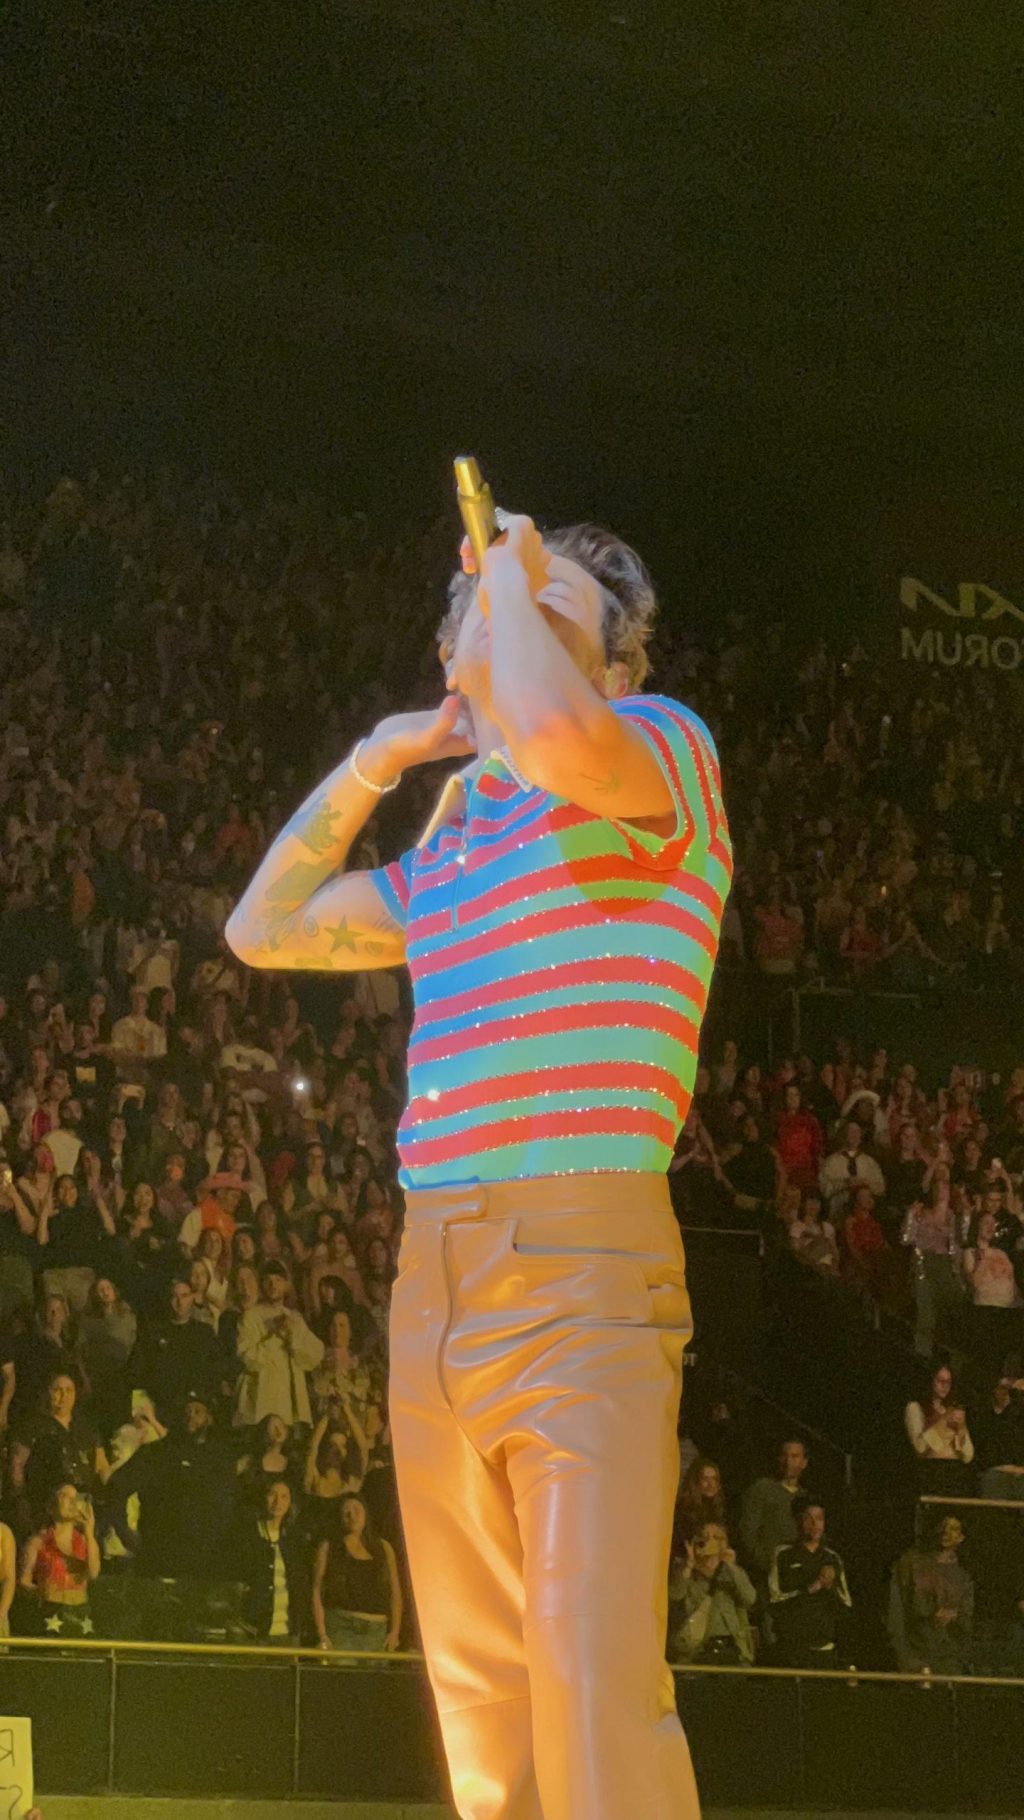 Styles performs at the Kia Forum on Nov. 2. Due to illness, Styles postponed his shows Nov. 5, 6 and 7, to January 2023. Photo courtesy of Gina Duhovic